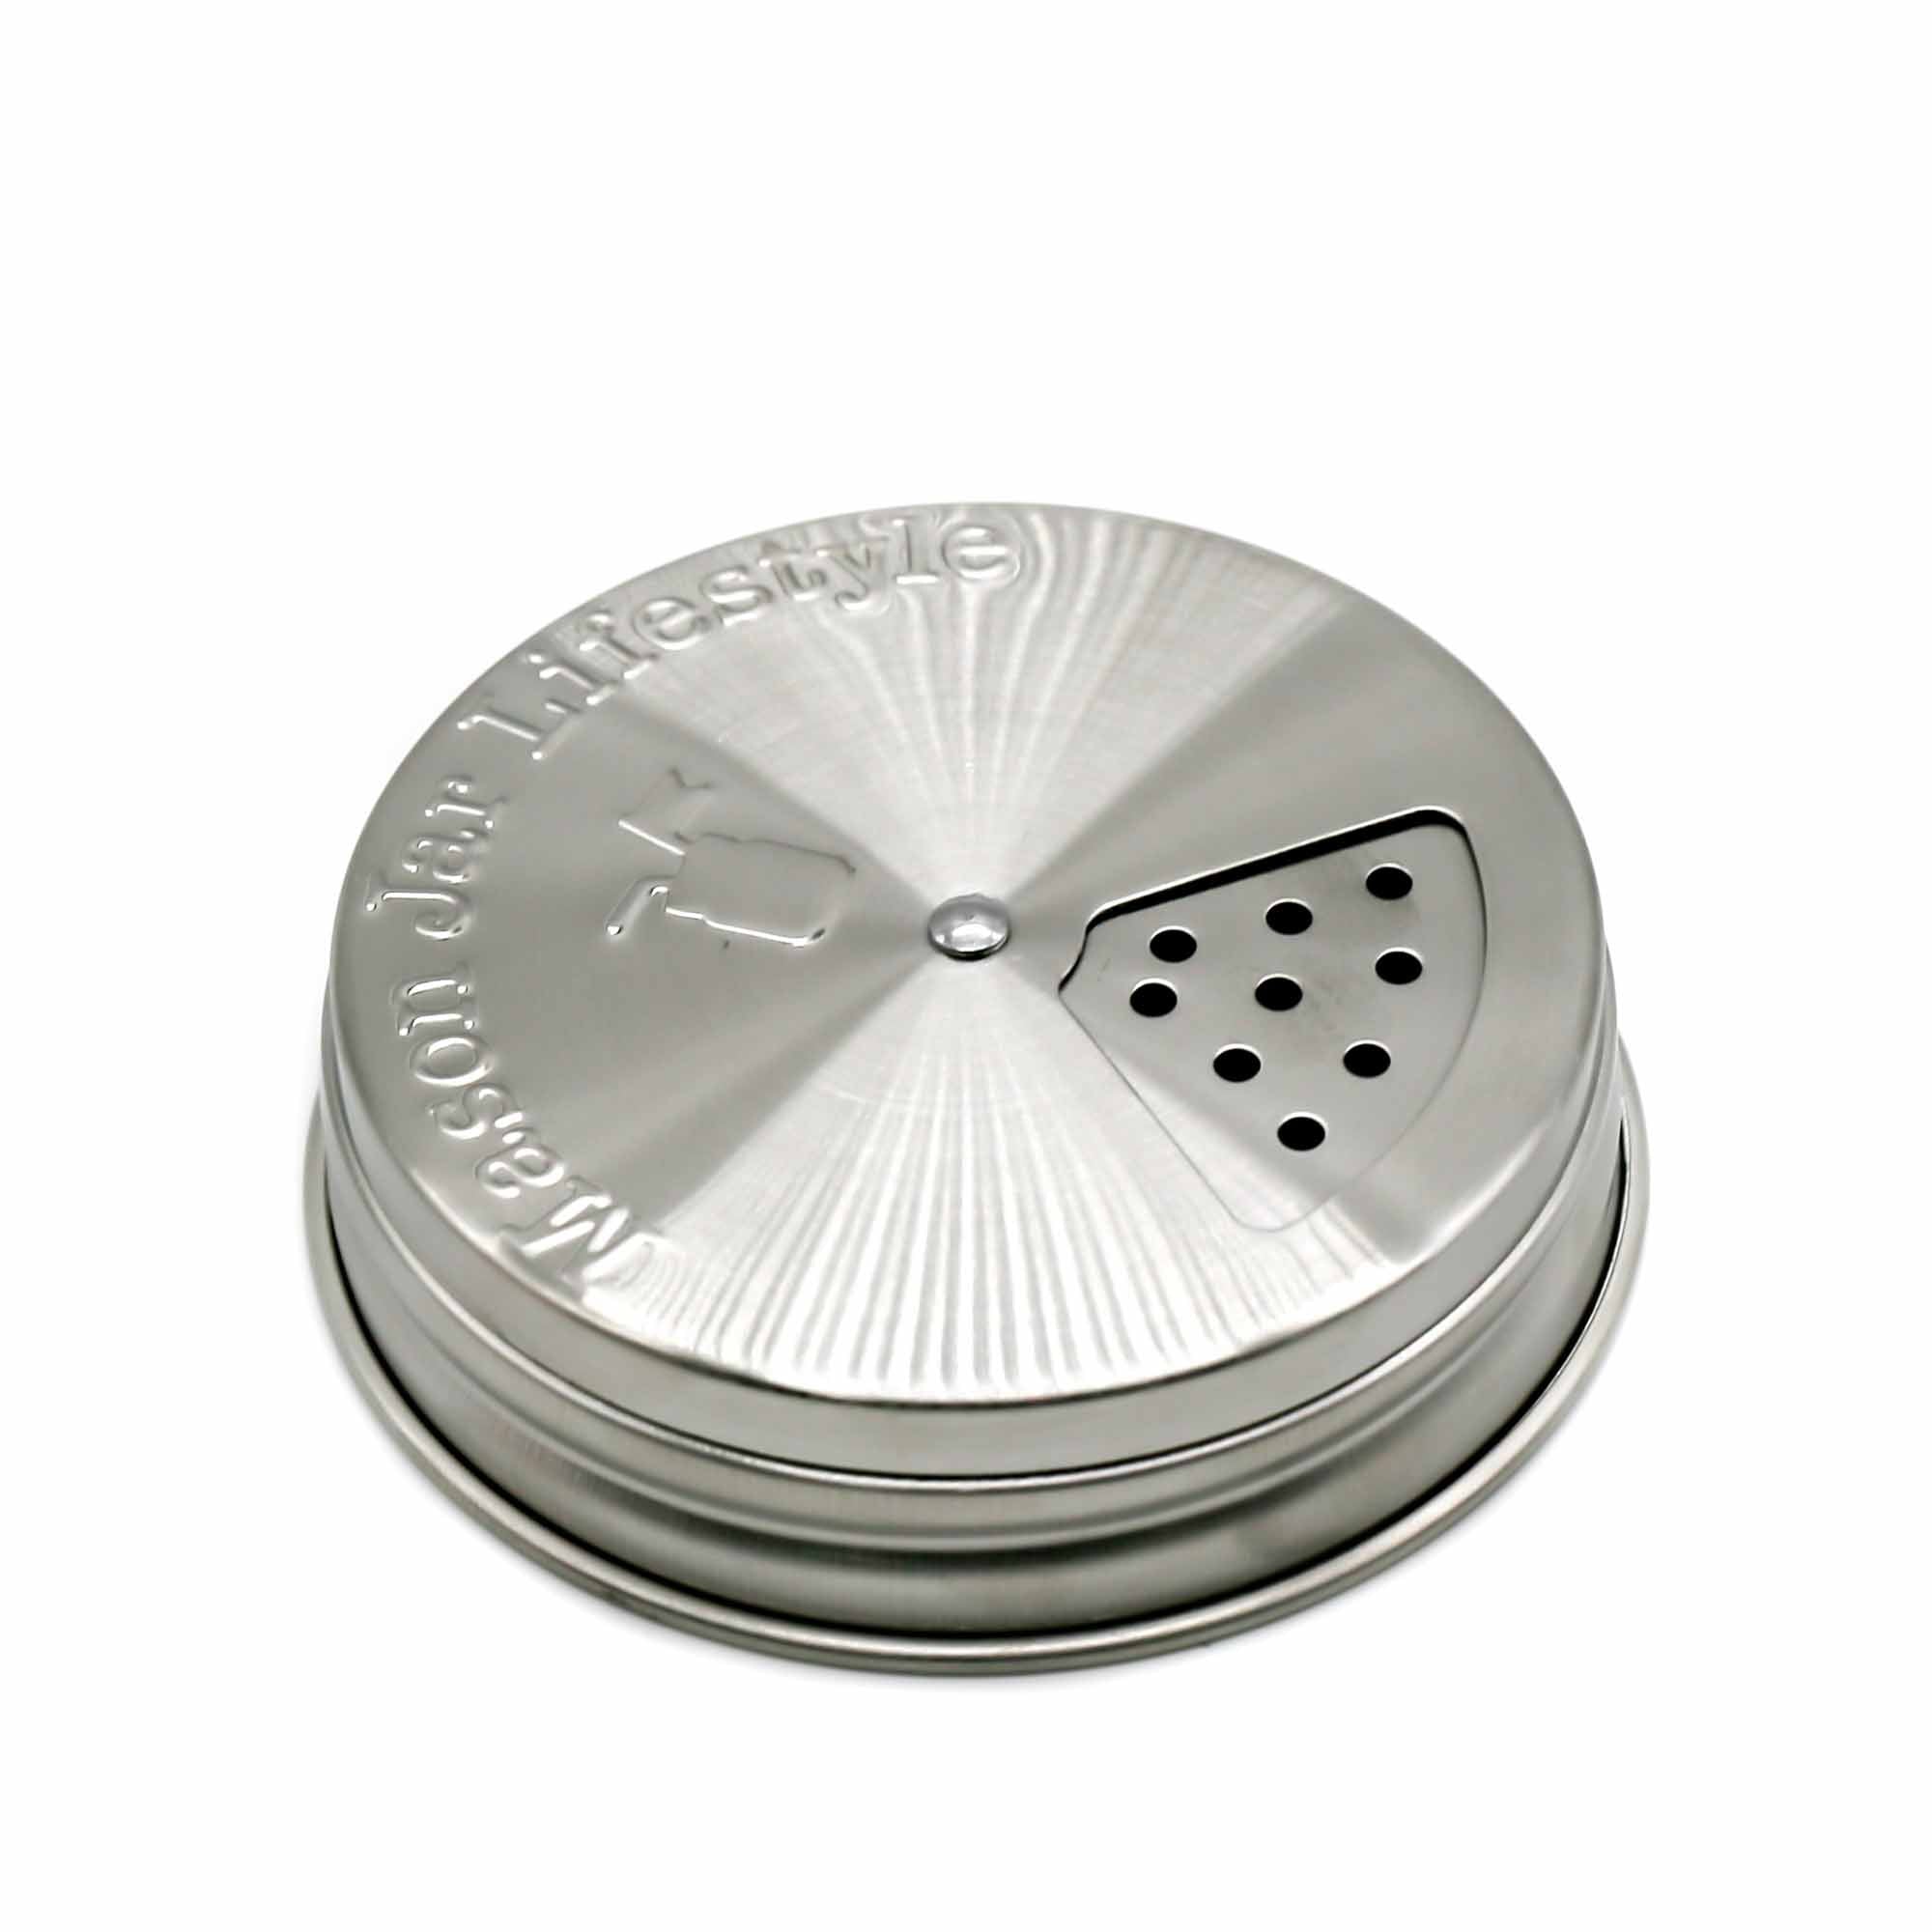 4 Pack Stainless Steel Spice Shaker Lids for Mason Jars - Mortise And Tenon